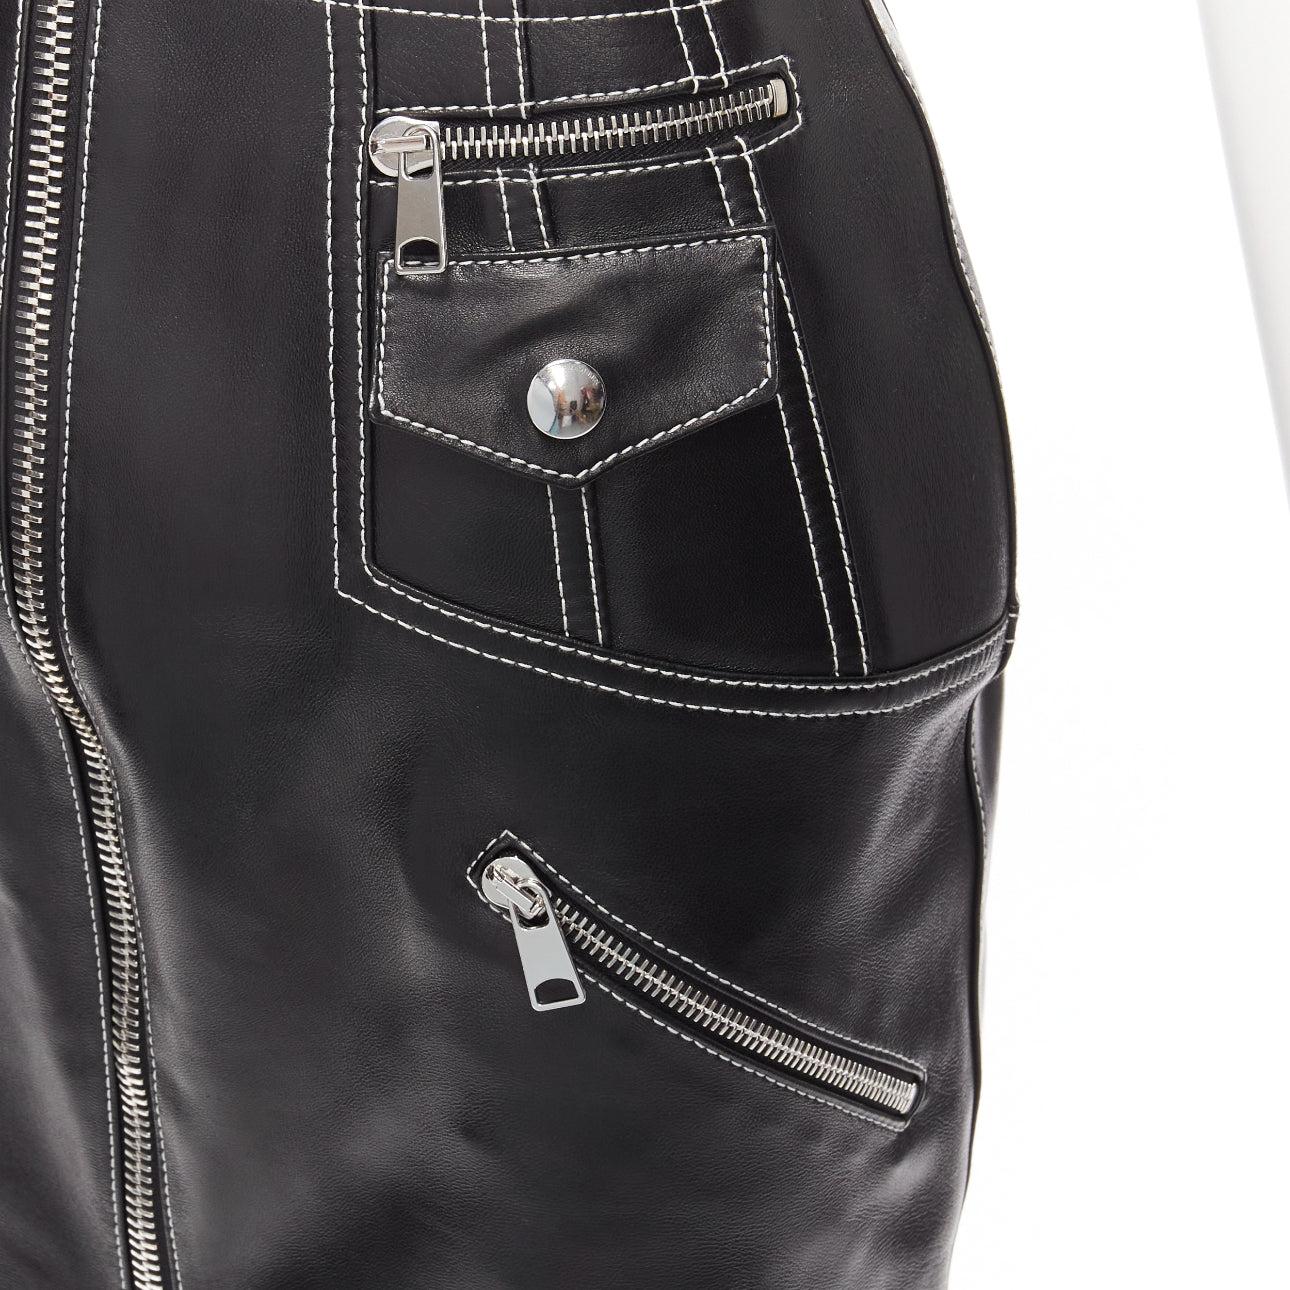 ALEXANDER MCQUEEN black leather white overstitch biker zip pencil skirt IT38 XS
Reference: AAWC/A00584
Brand: Alexander McQueen
Designer: Sarah Burton
Collection: 2020 - Runway
Material: Leather
Color: Black, White
Pattern: Solid
Closure: